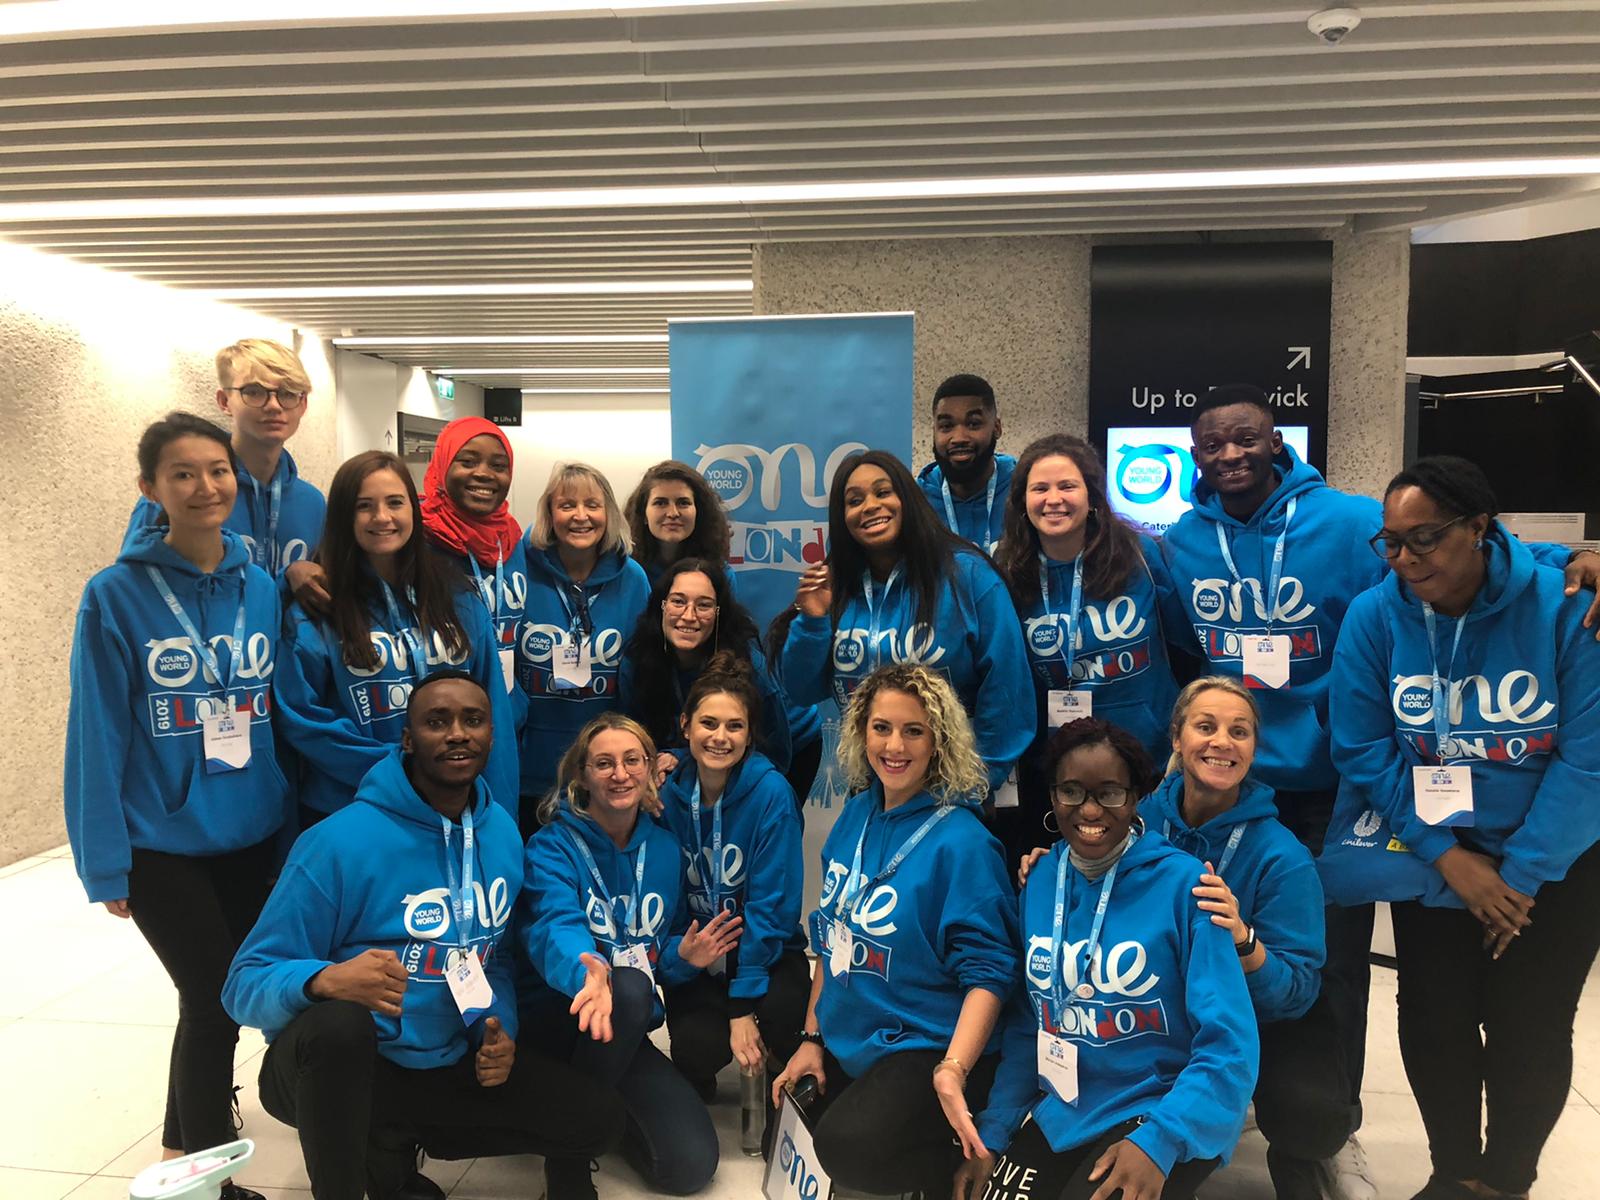 Group photo of One Young World Volunteers wearing branded blue hoodies